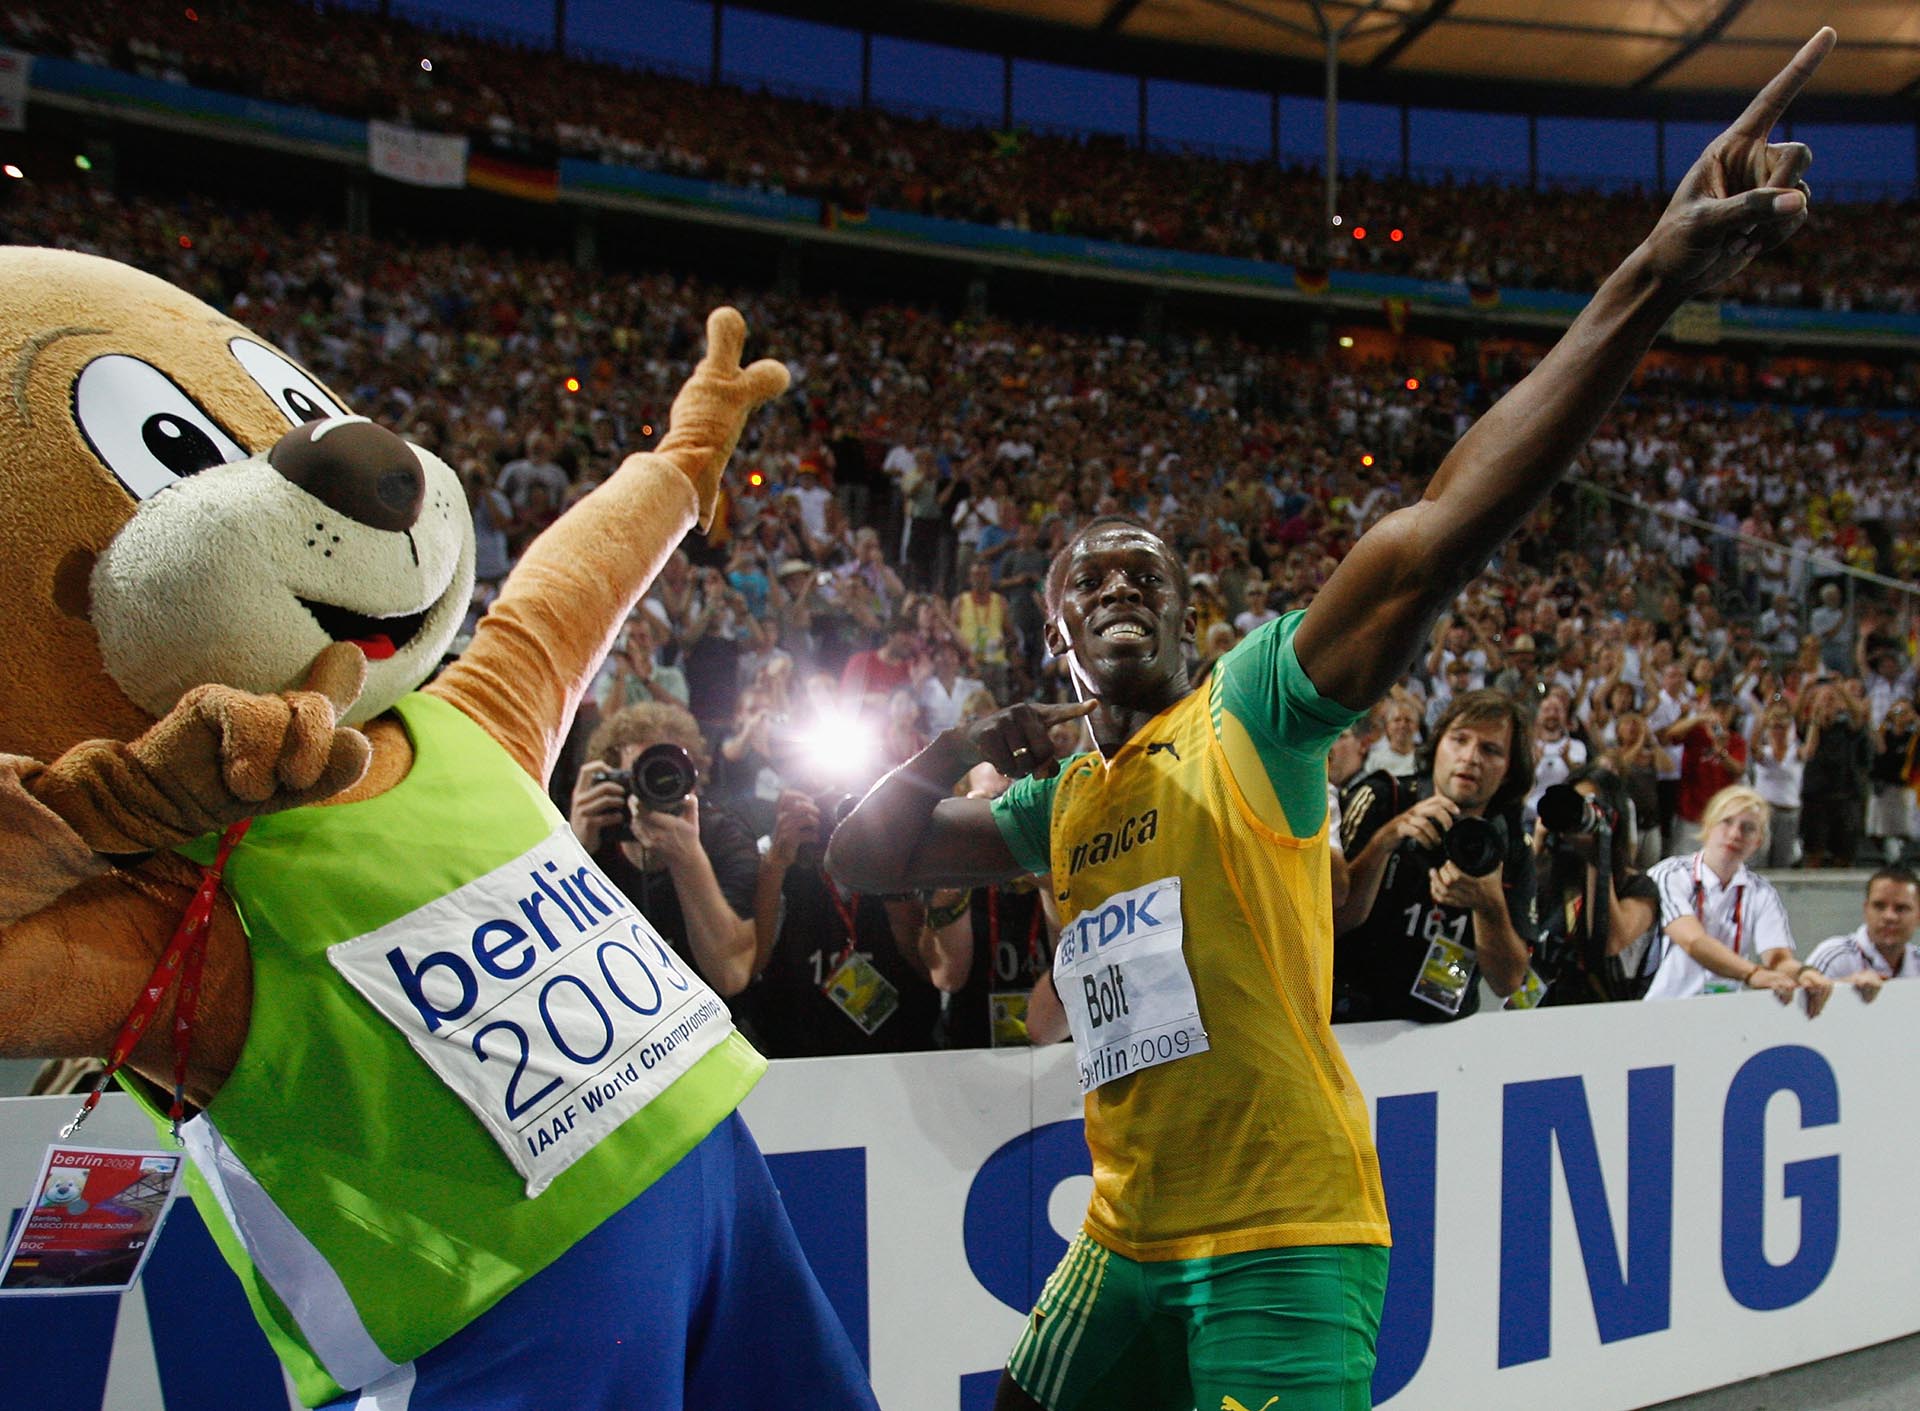 BERLIN - AUGUST 20:  Usain Bolt of Jamaica celebrates winning the gold medal in the men's 200 Metres Final during day six of the 12th IAAF World Athletics Championships at the Olympic Stadium on August 20, 2009 in Berlin, Germany.  Bolt set a new World Record of 19.19 seconds.  (Photo by Andy Lyons/Getty Images)